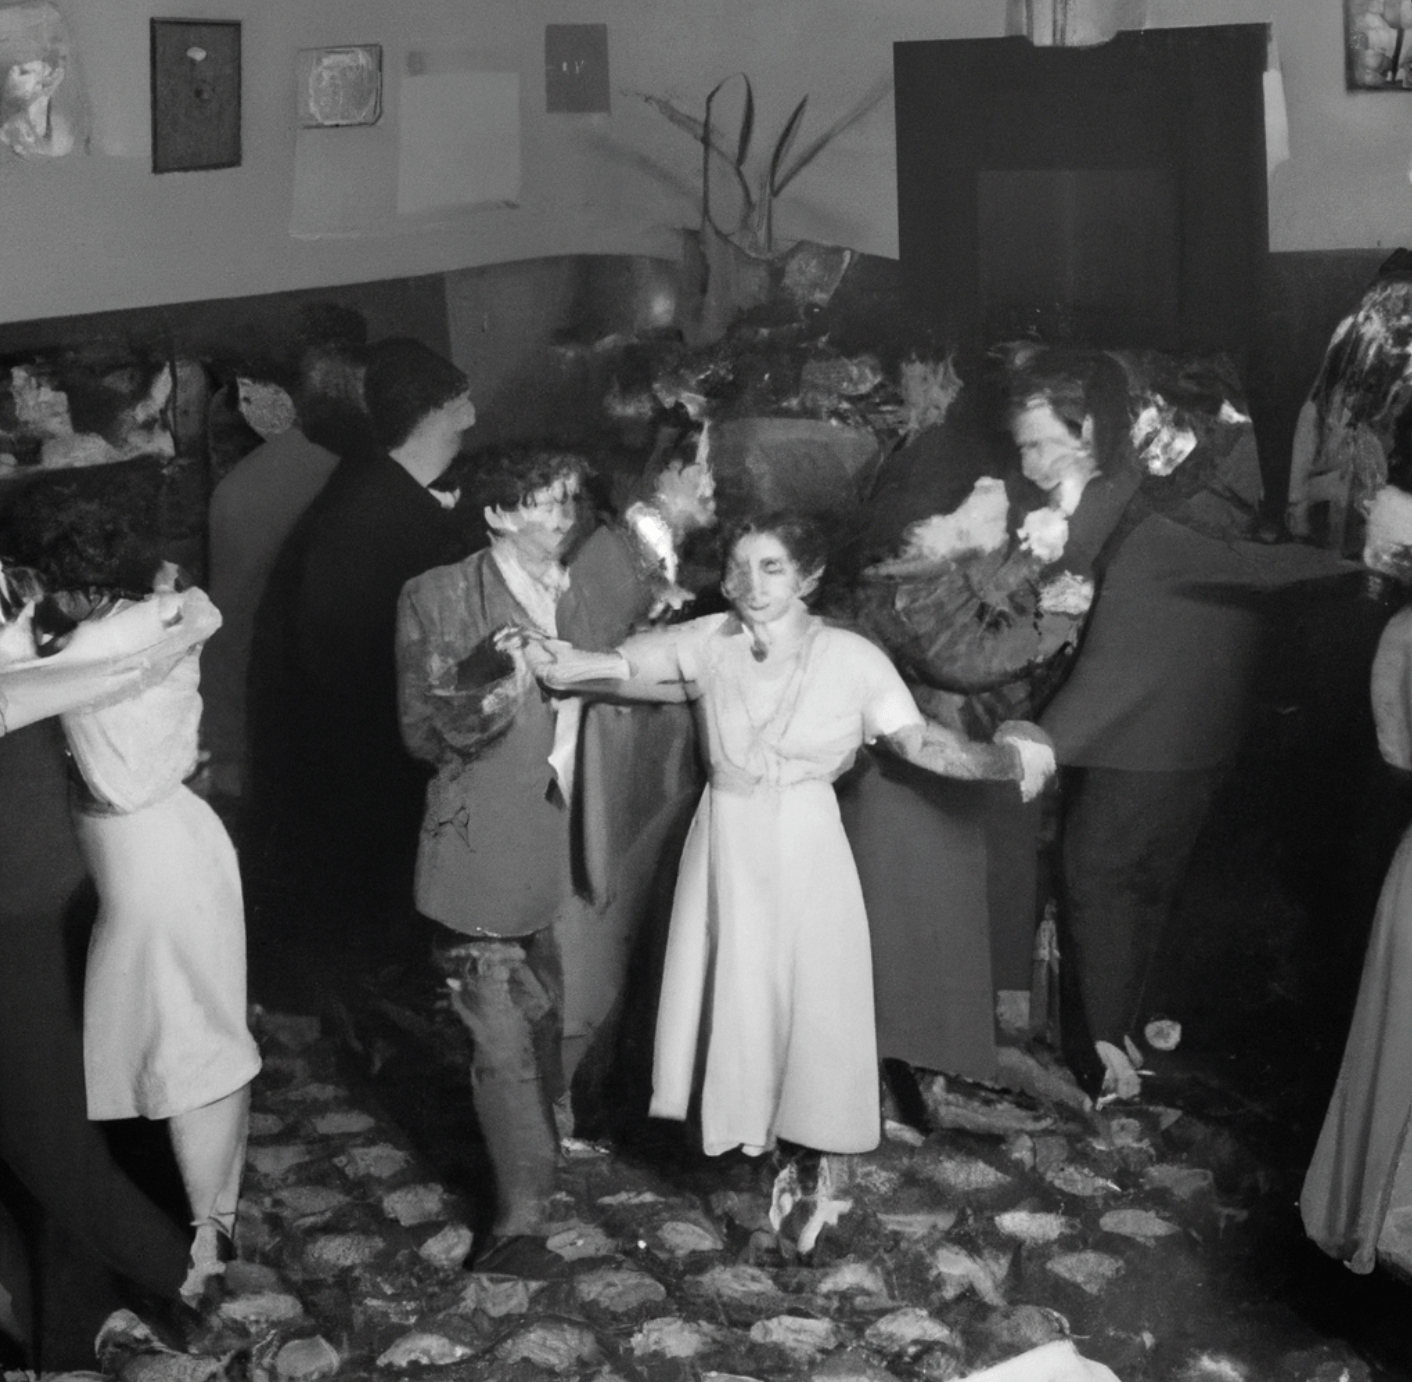 a generated black and white image of people dancing